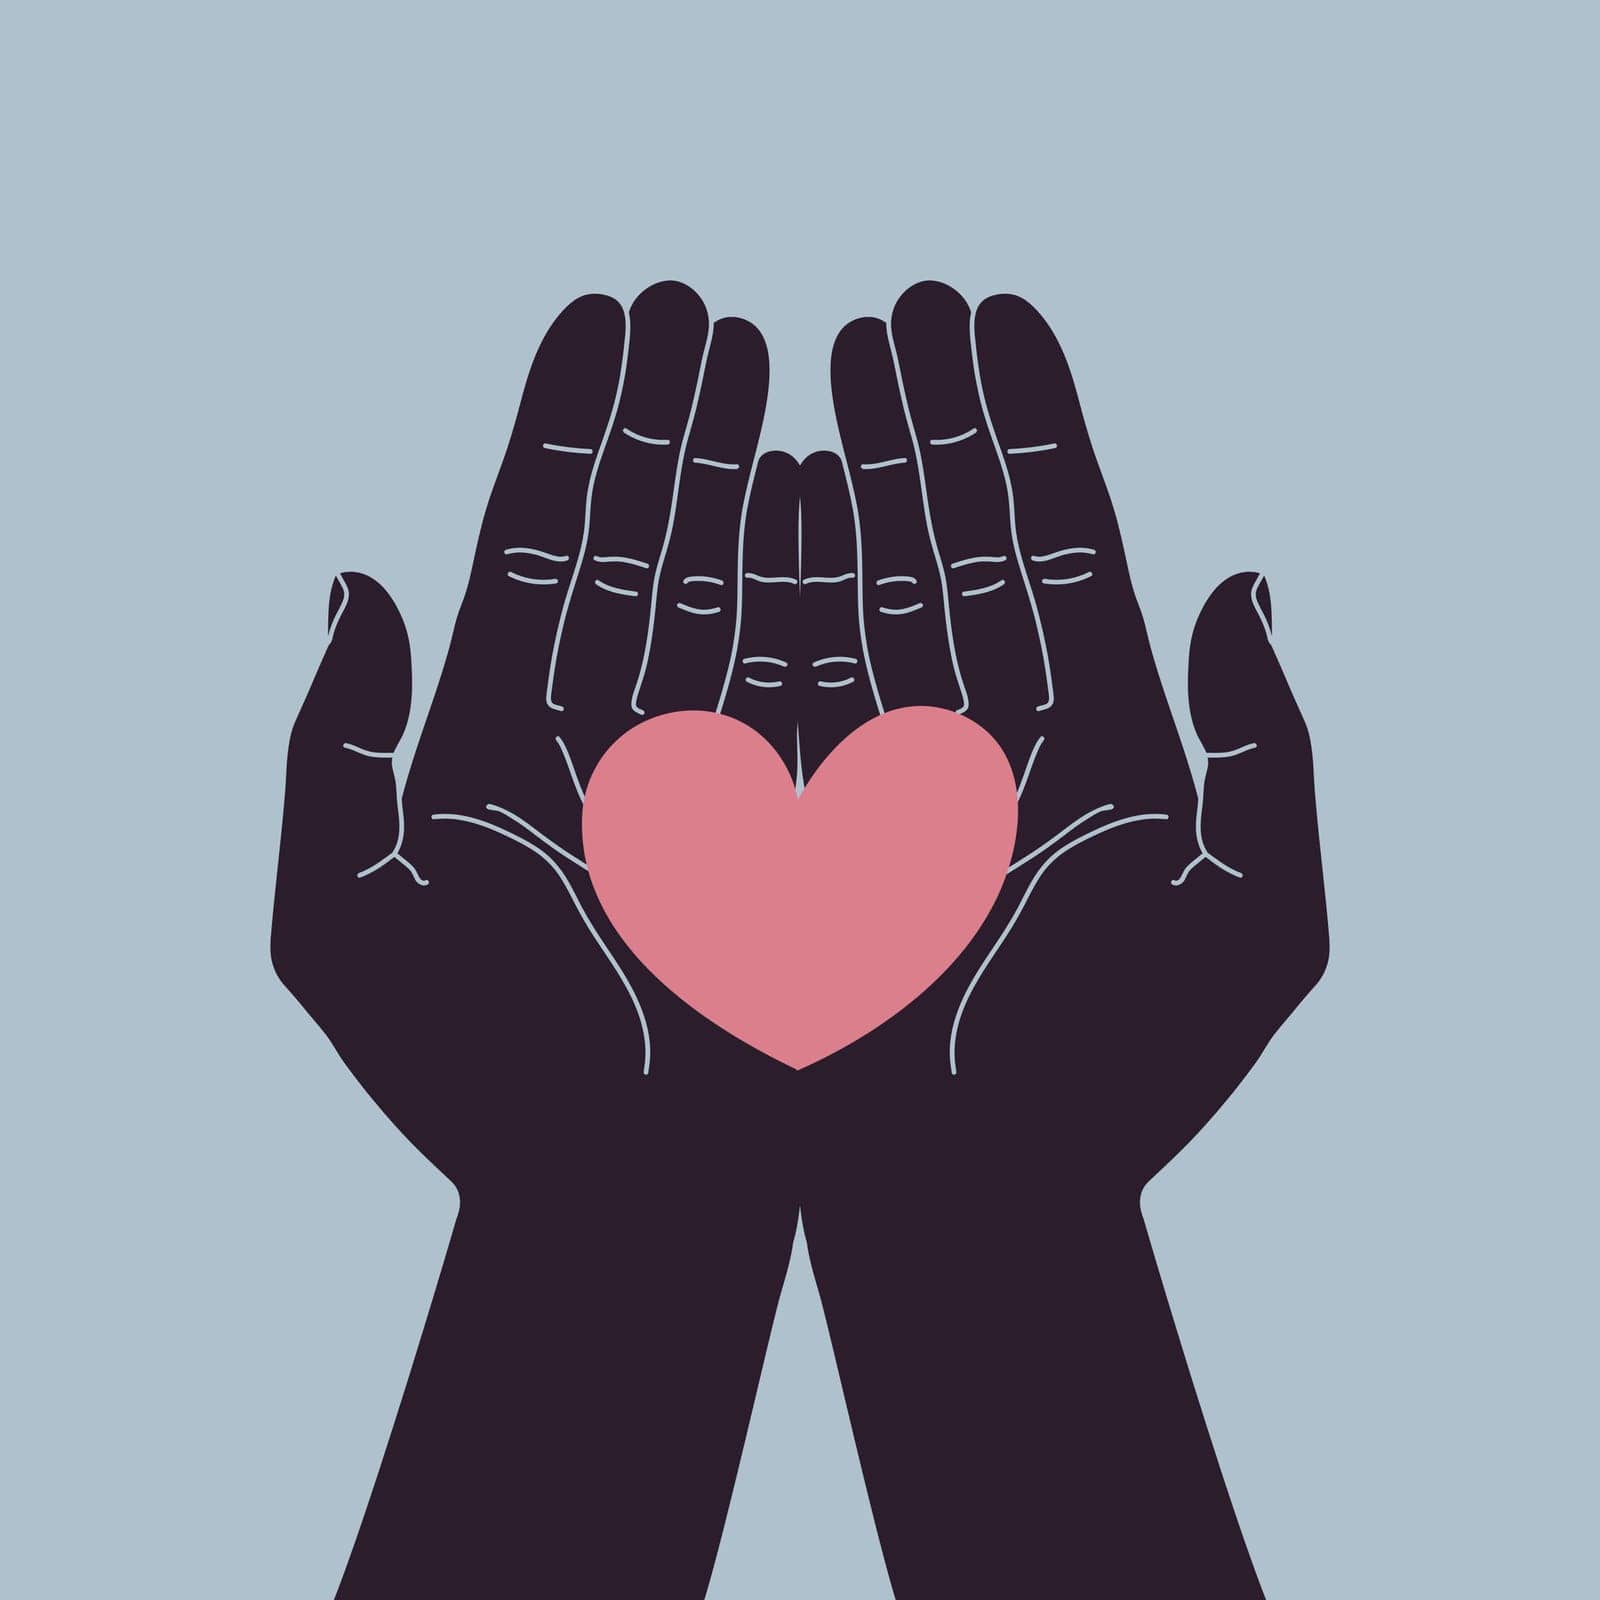 Giving or taking love hand gesture. Cupped hands with open palms. Hands carefully holding heart. Vector illustration by psychoche